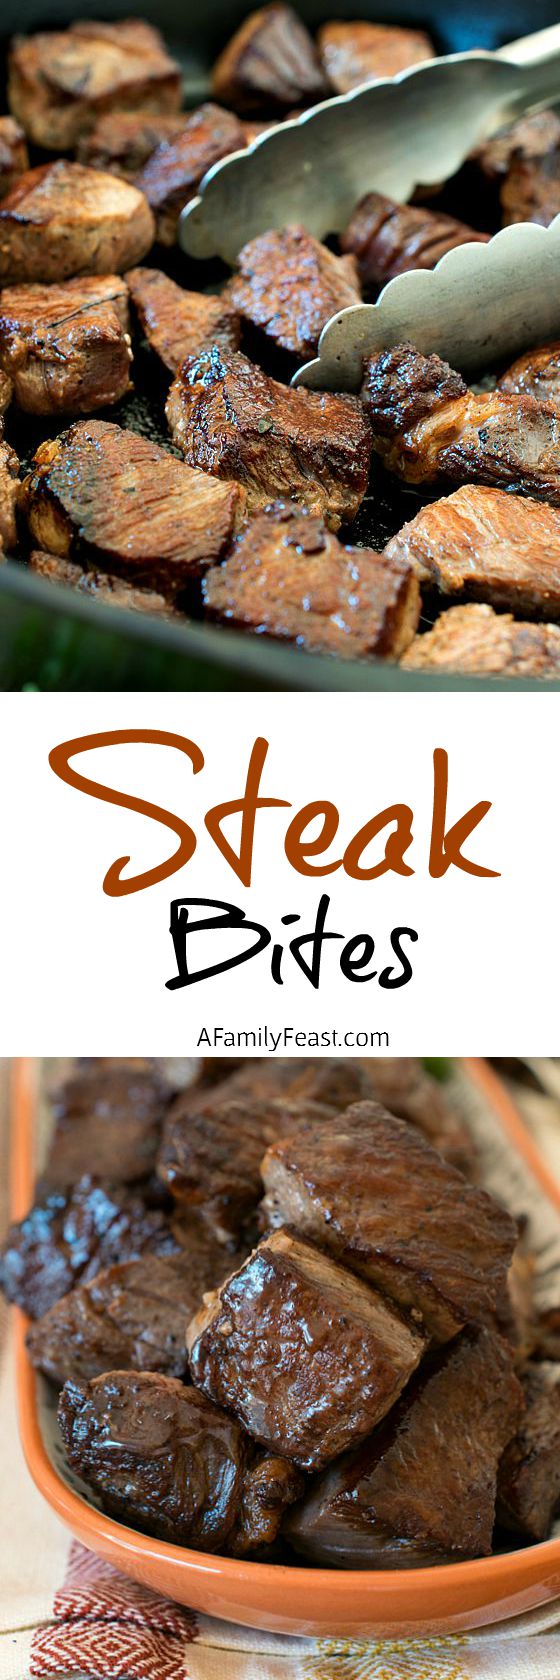 Steak Bites - Super delicious and easy to prepare - our Steak Bites are a great weeknight meal that the entire family will love!